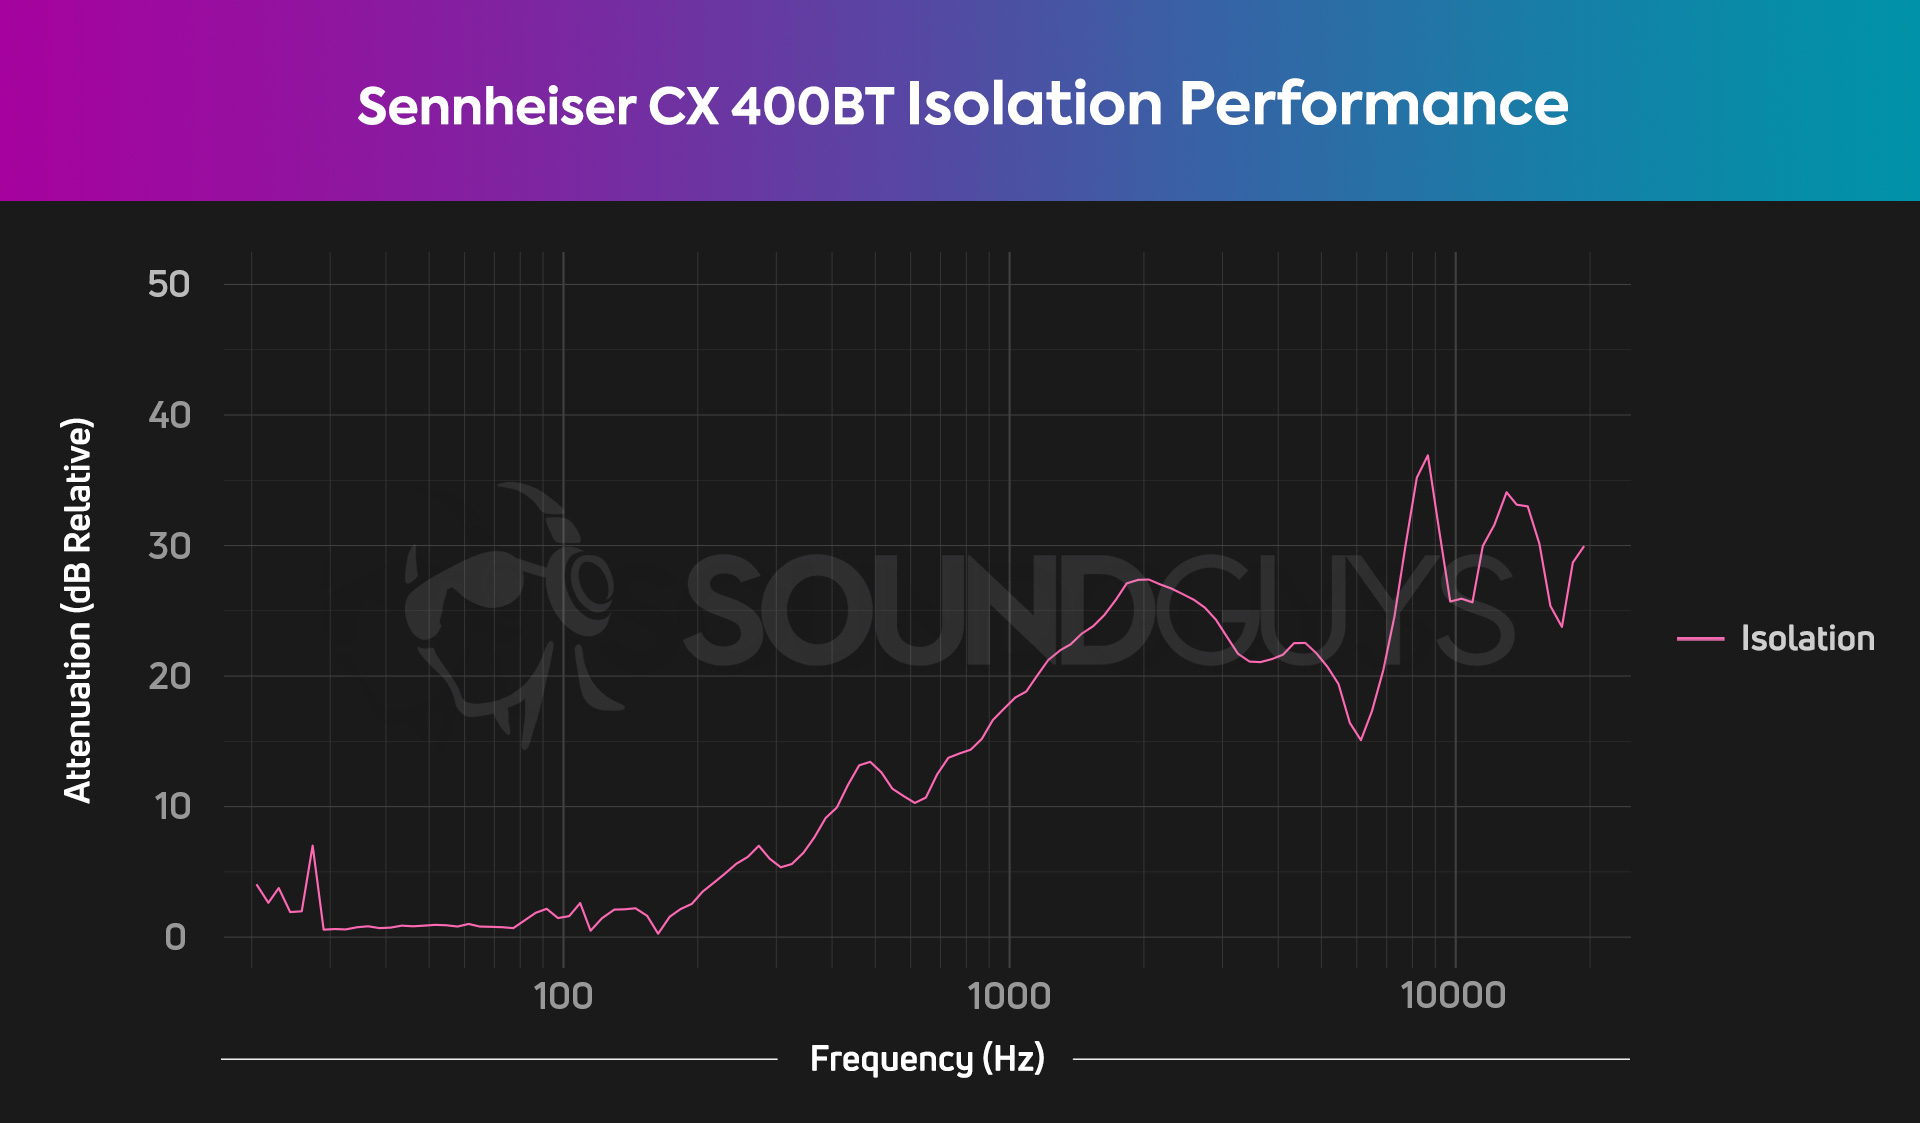 An isolation chart for the Sennheiser CX 400BT true wireless earphones depicts above average passive isolation.